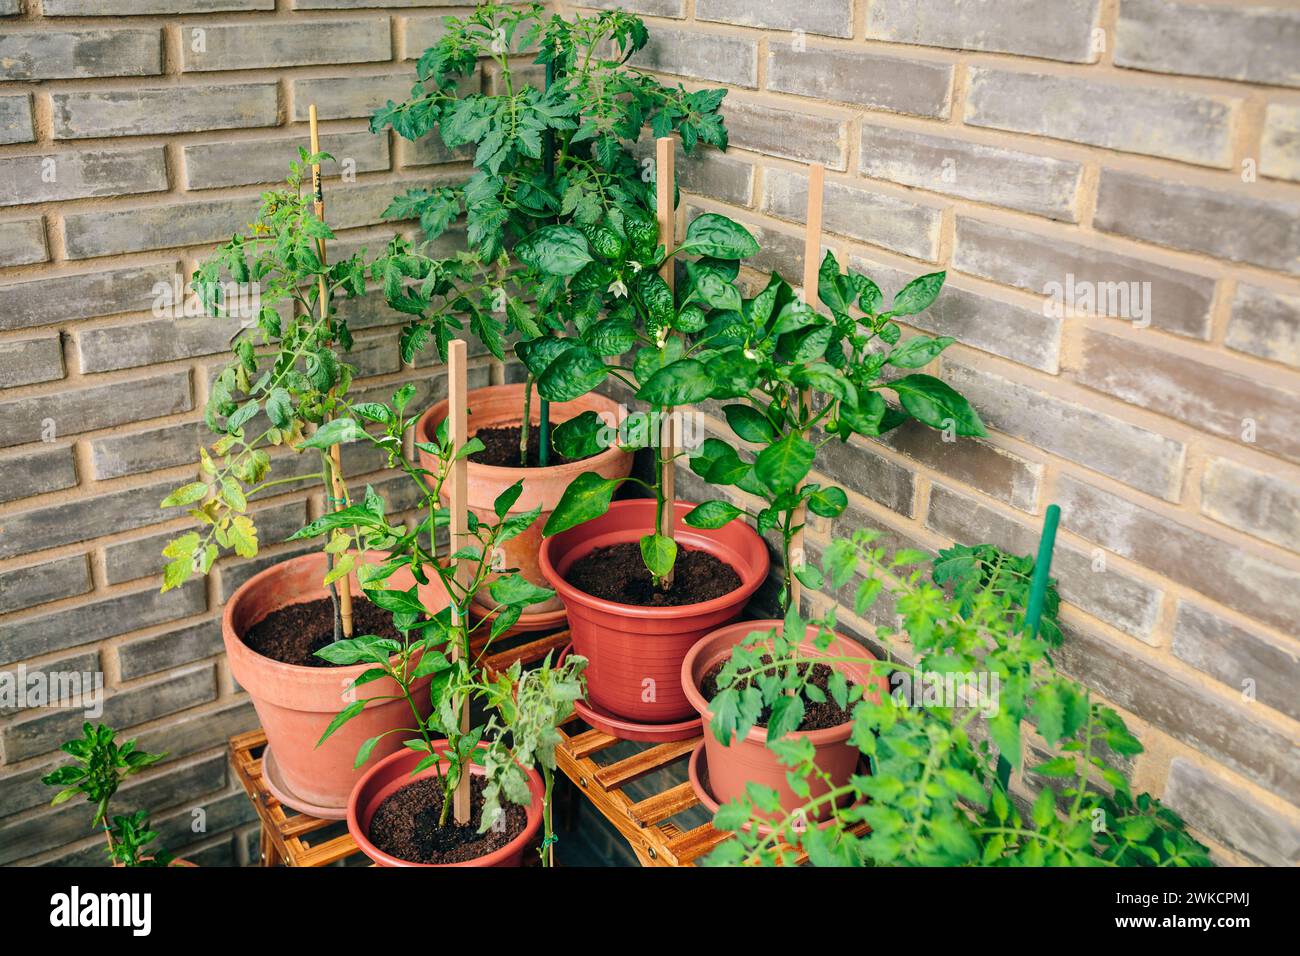 Vegetable garden on balcony corner of apartment with plants growing on ceramic pots Stock Photo